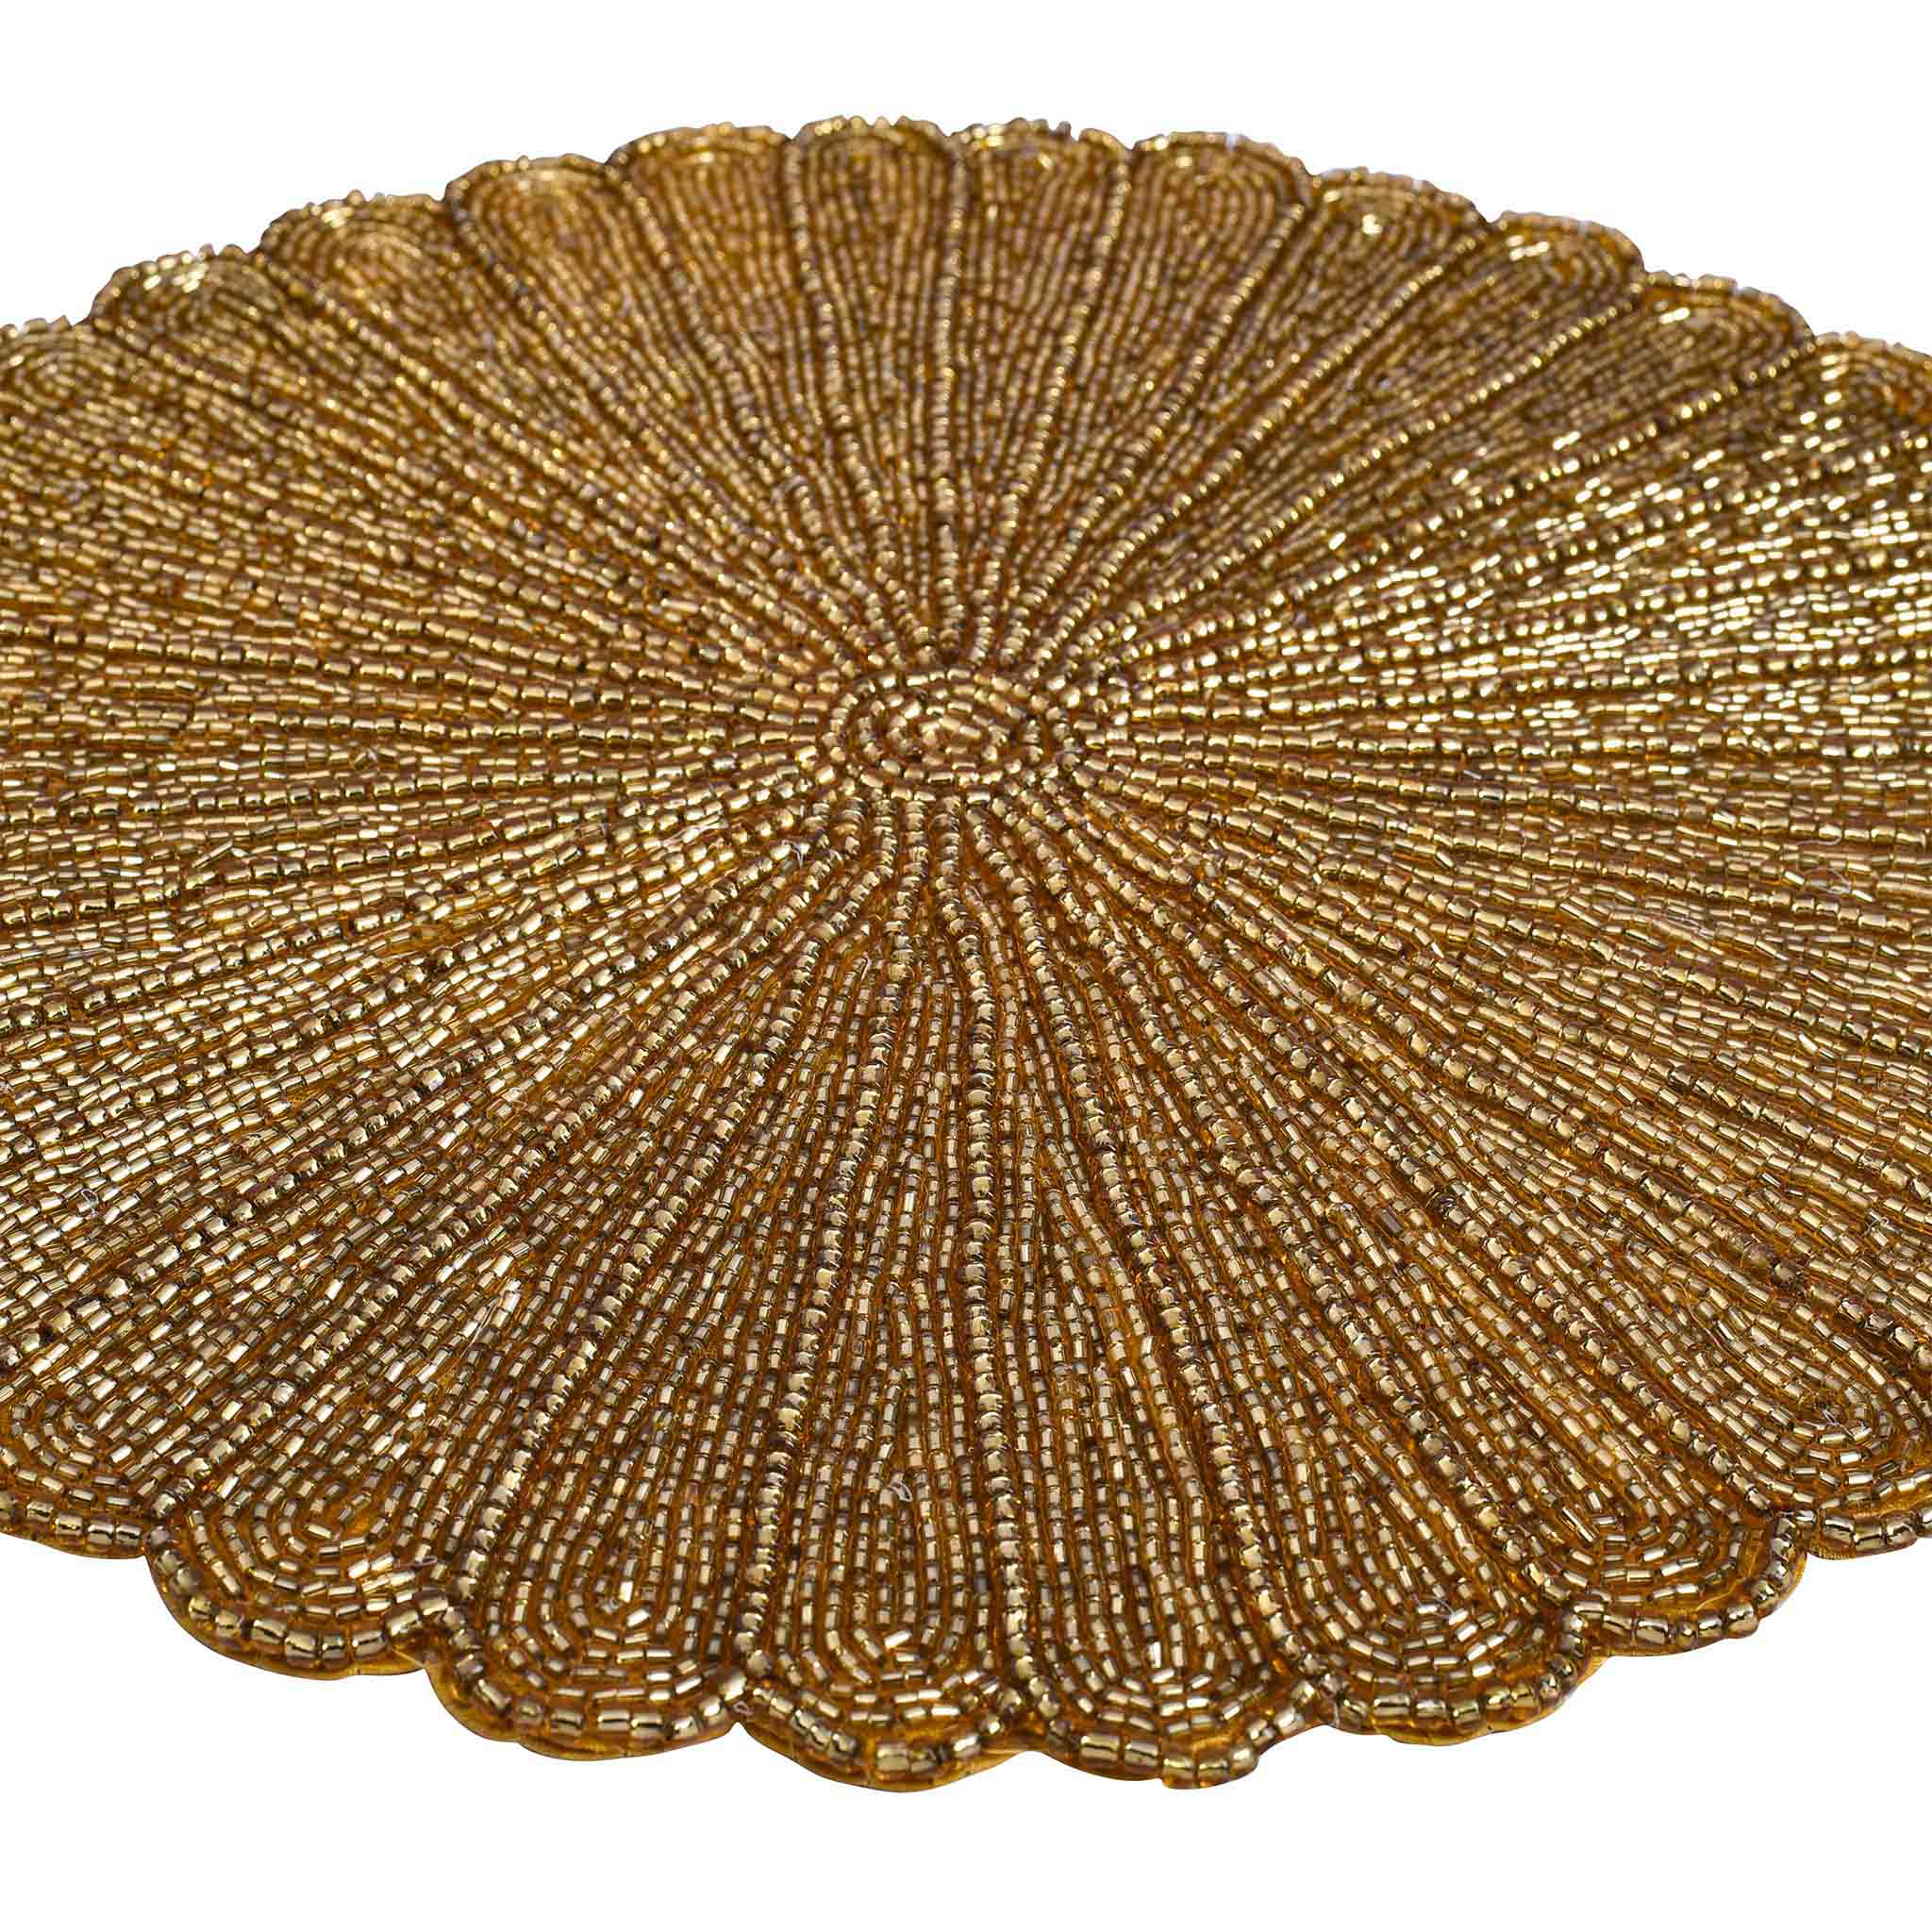 Scalloped Embroidered Placemat in Gold, set of 2/4